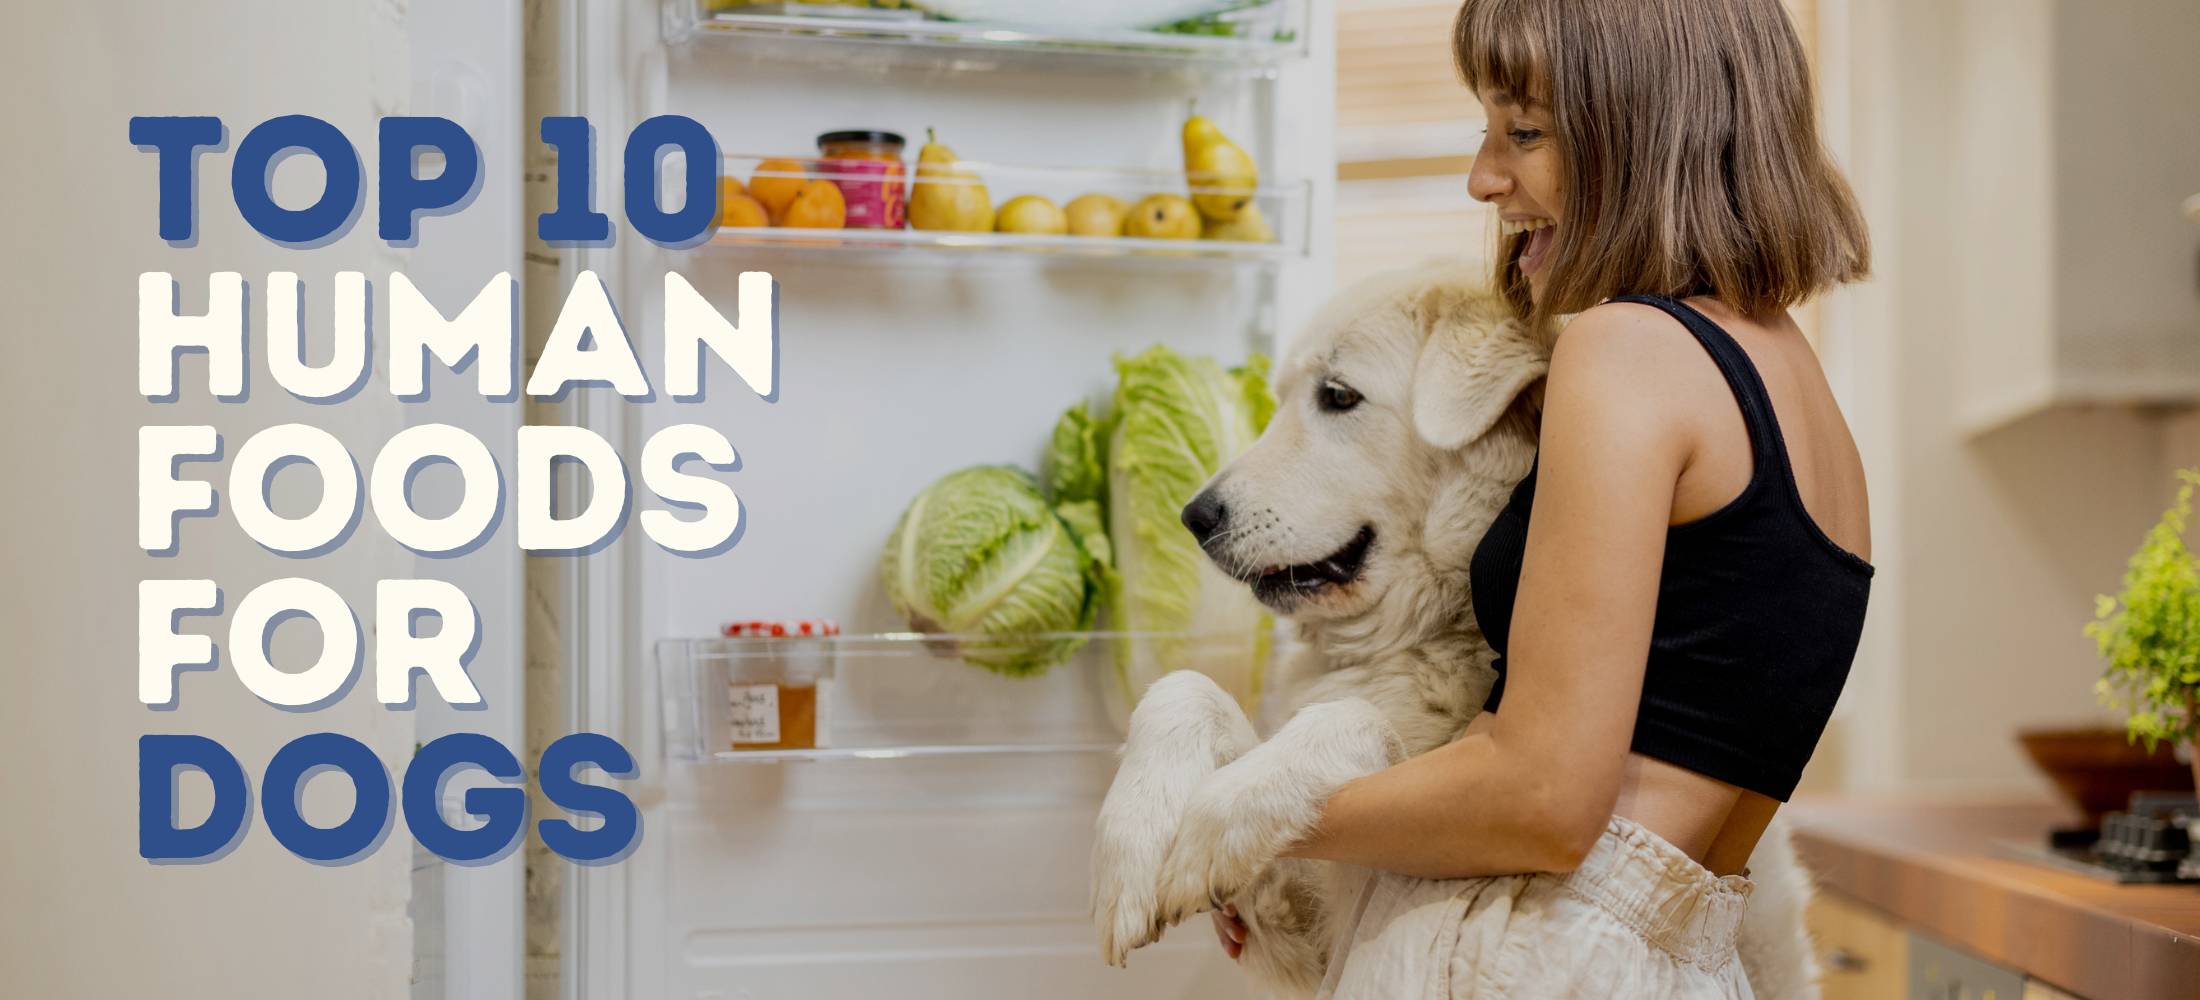 Owner and white lab look into the refrigerator filled with healthy human foods for dogs